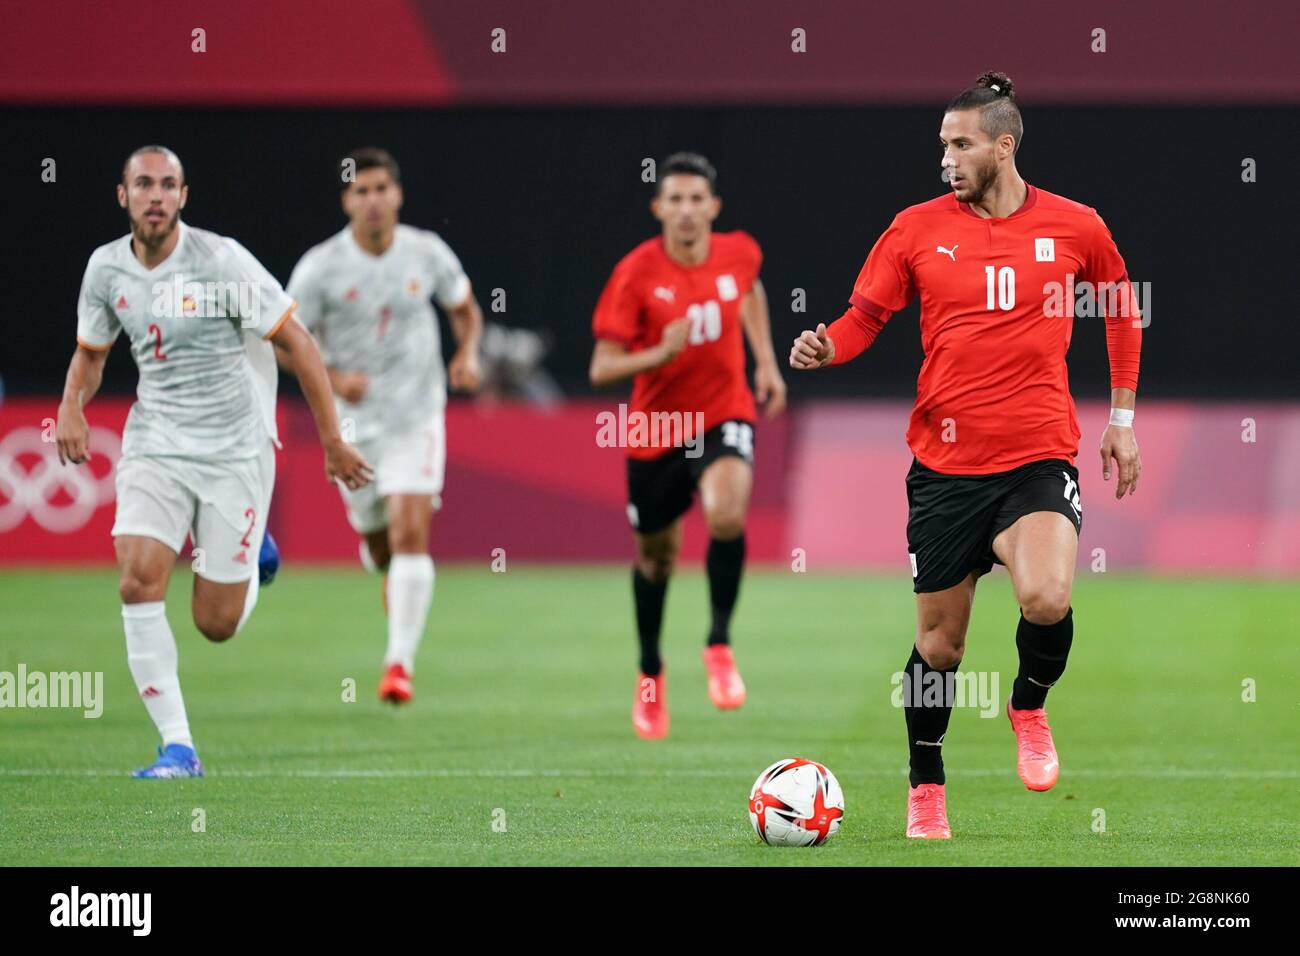 Sapporo, Japan. 22nd July, 2021. Ramadan Sobhi (11 Egypt) controls the ball (action) during the Men's Olympic Football Tournament Tokyo 2020 match between Egypt and Spain at Sapporo Dome in Sapporo, Japan. Credit: SPP Sport Press Photo. /Alamy Live News Stock Photo